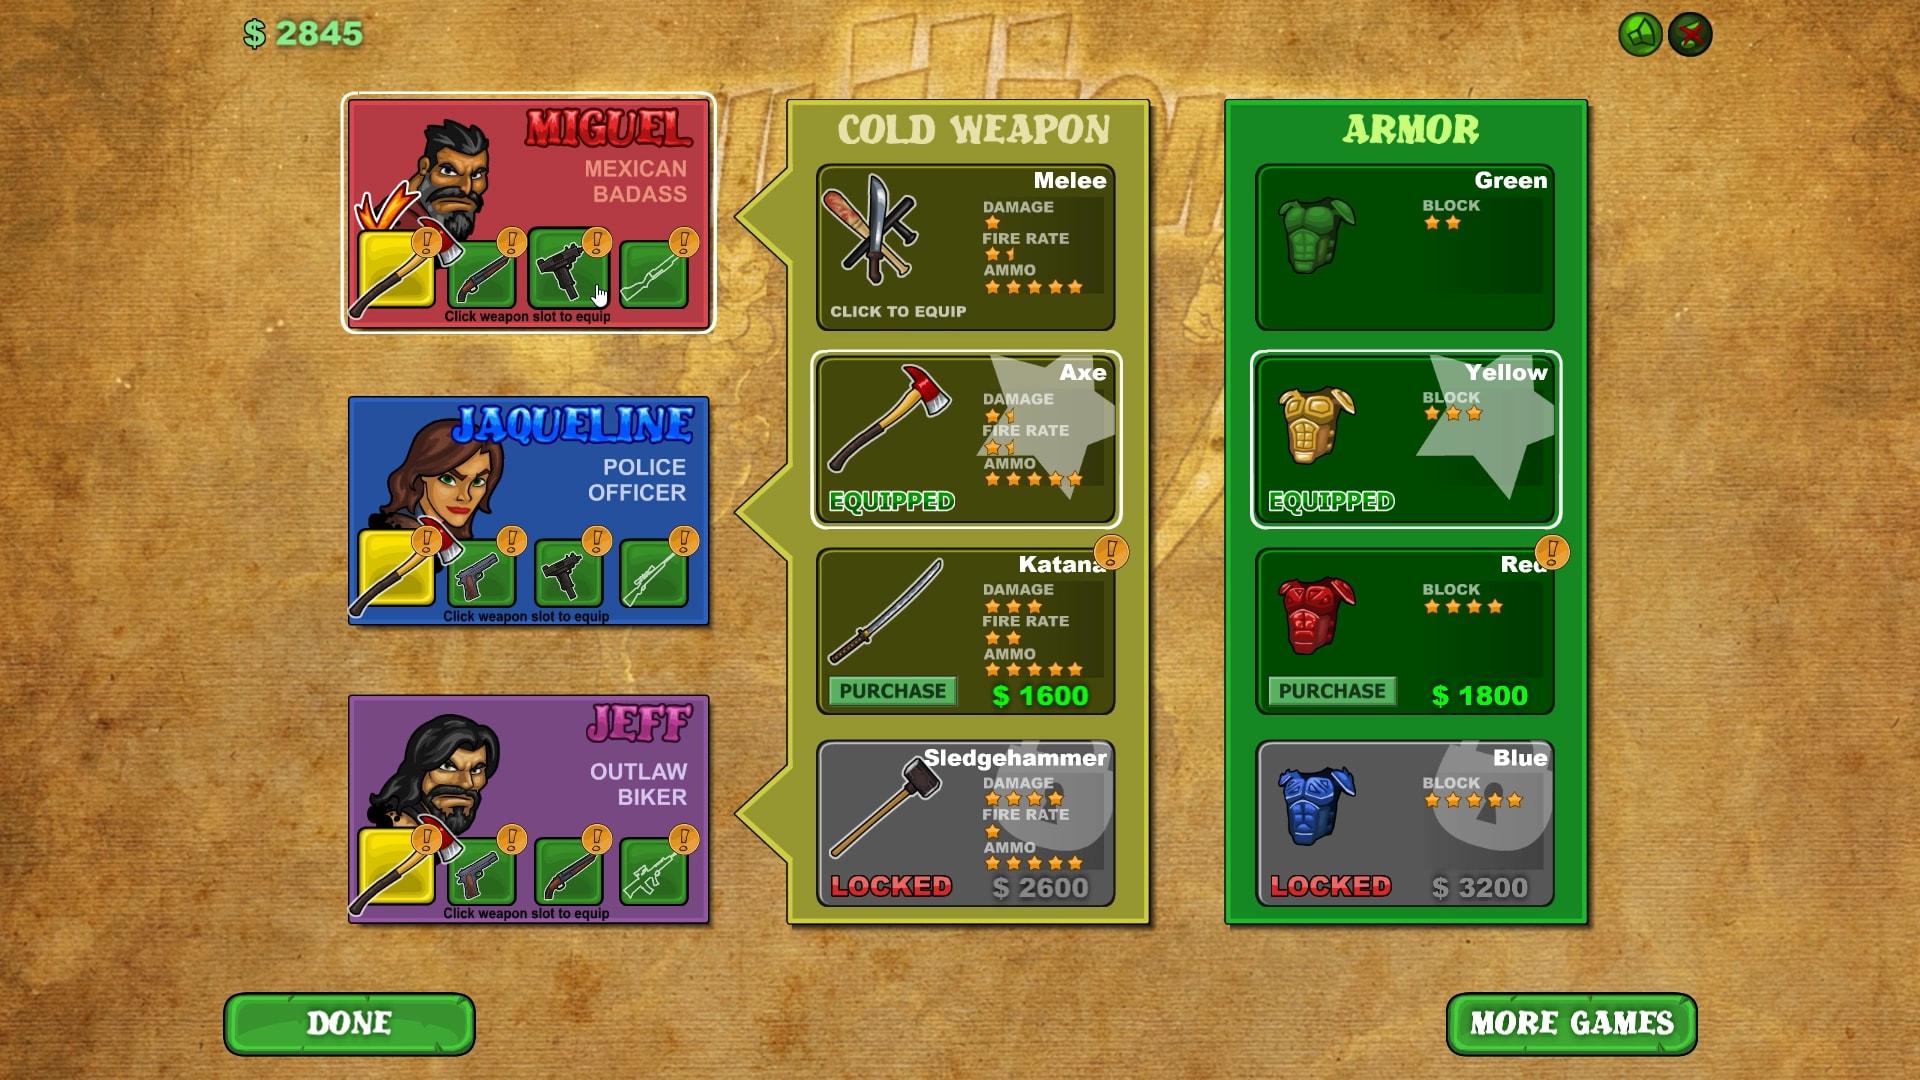 Screenshot №5 from game Tequila Zombies 3